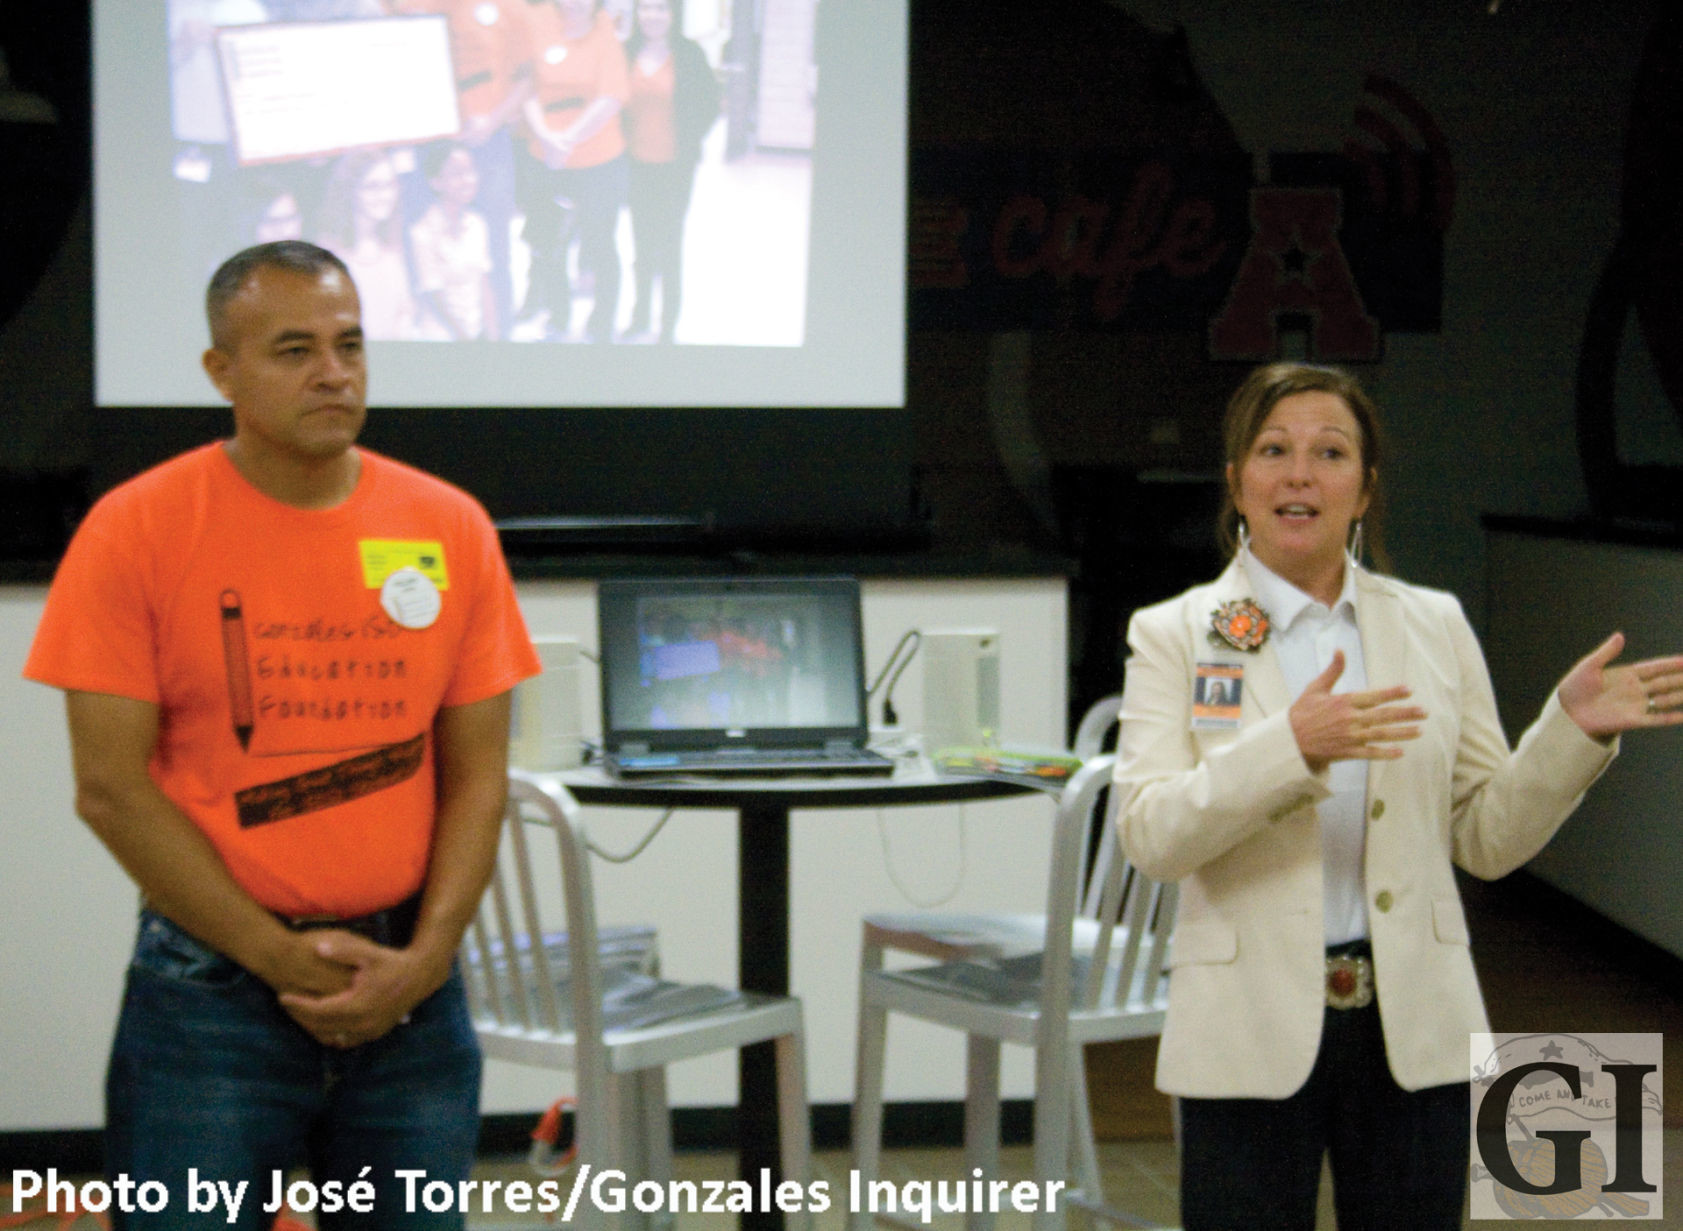 Gonzales ISD Education Foundation president Felipe Leon and GISD Superintendent Dr. Kim Strozier hosted First Friday at the school cafeteria to kick off the foundation’s annual campaign.